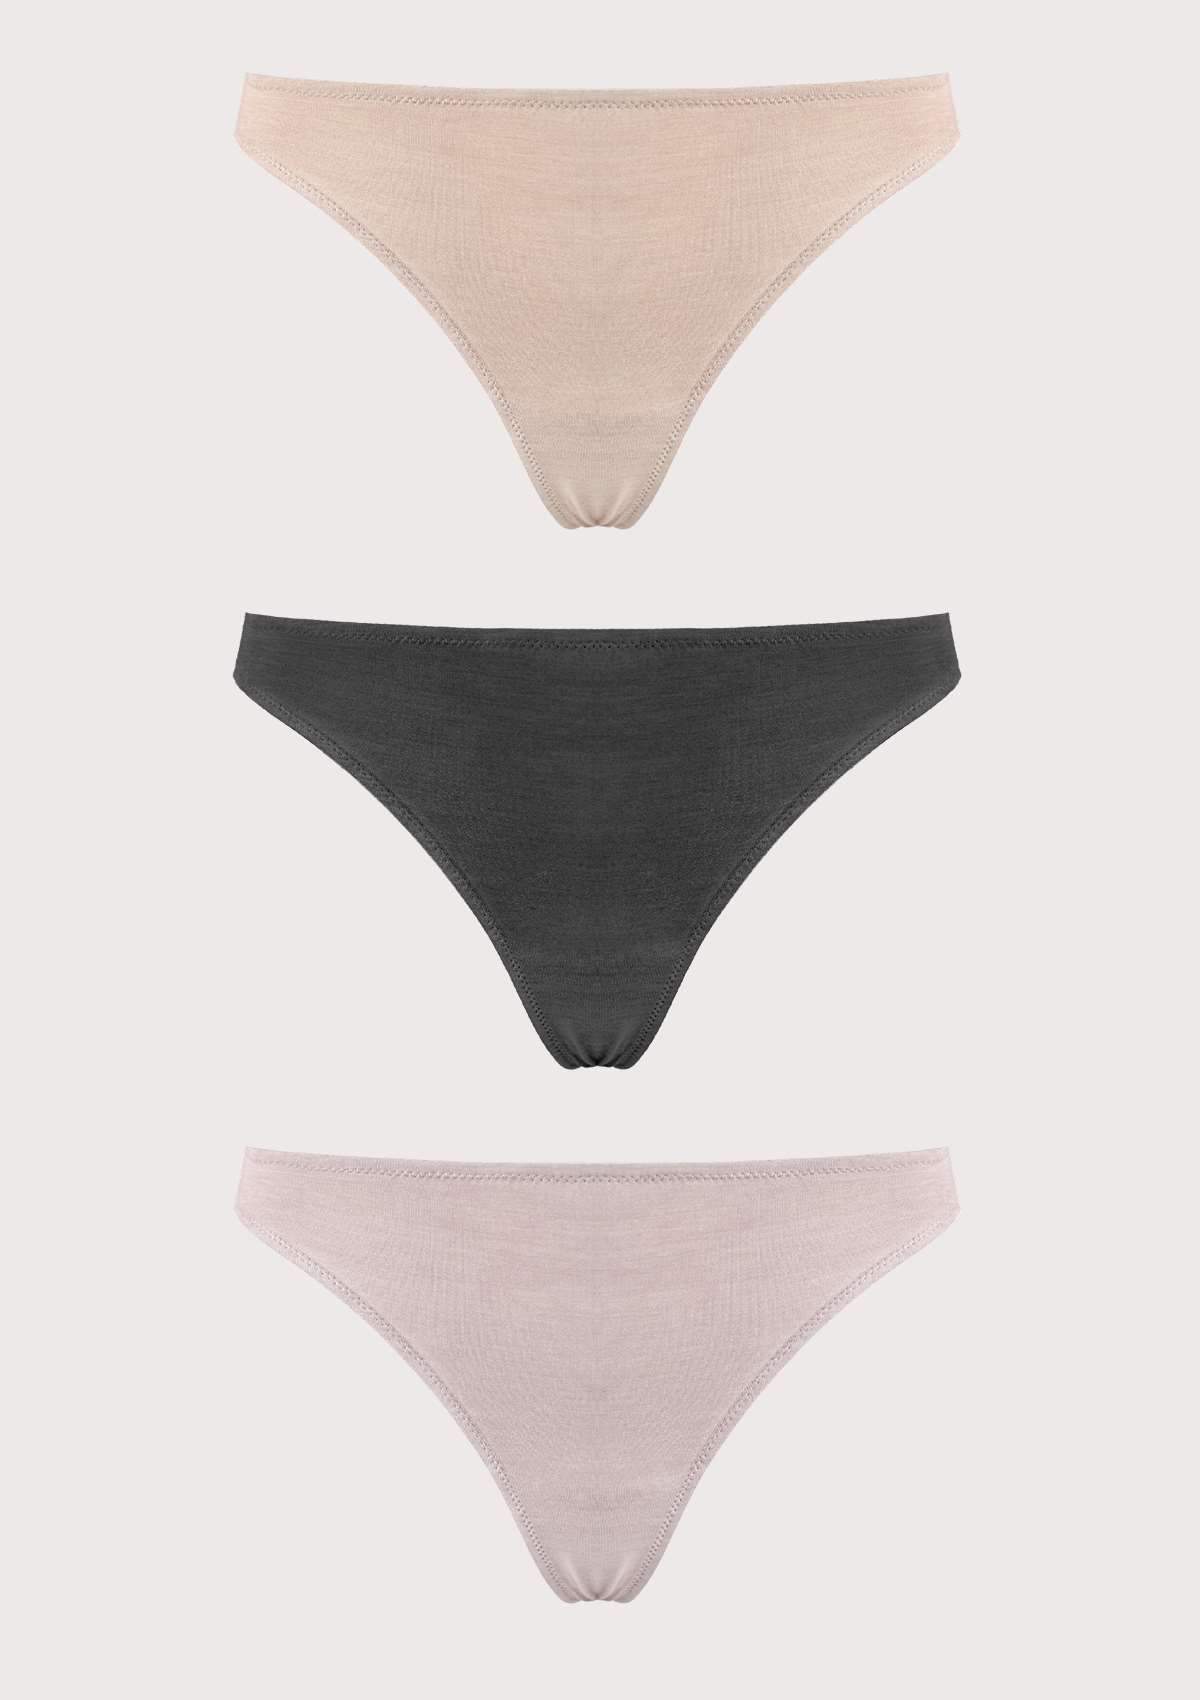 HSIA Comfort Cotton Thongs 3 Pack - S / Beige+Black+Pink